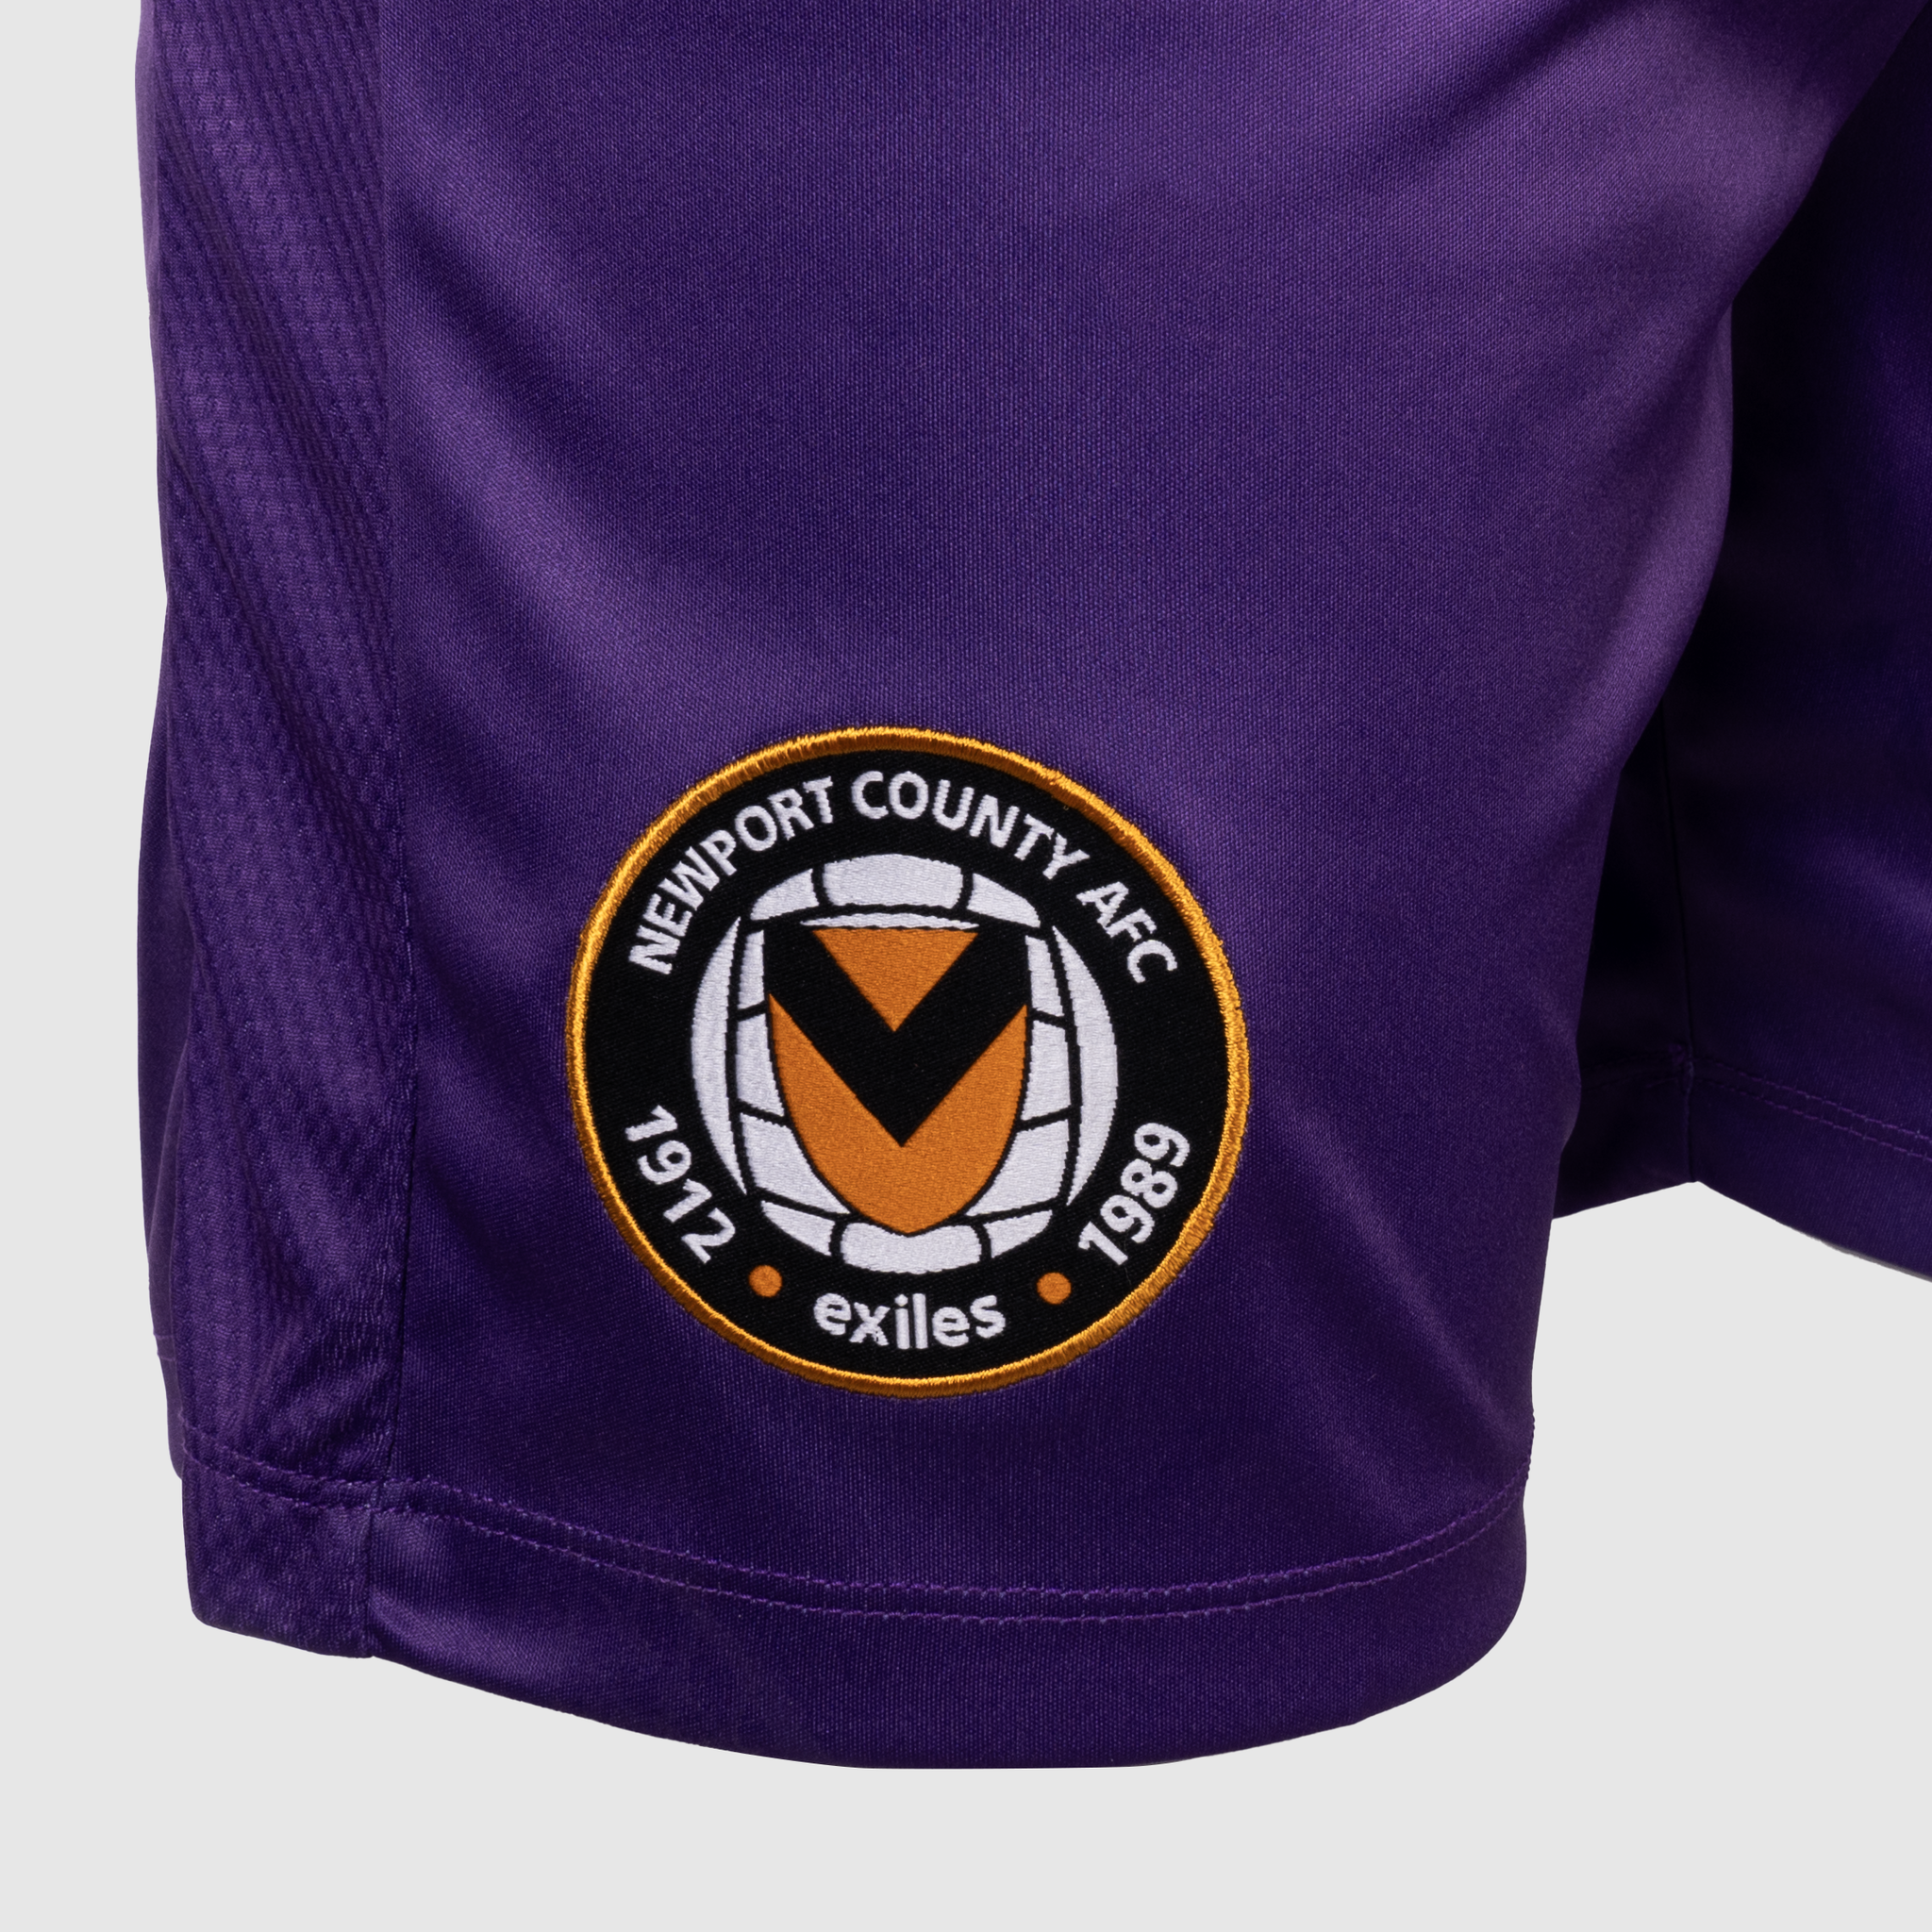 Newport County AFC Match GK Shorts 23/24 Away Youth